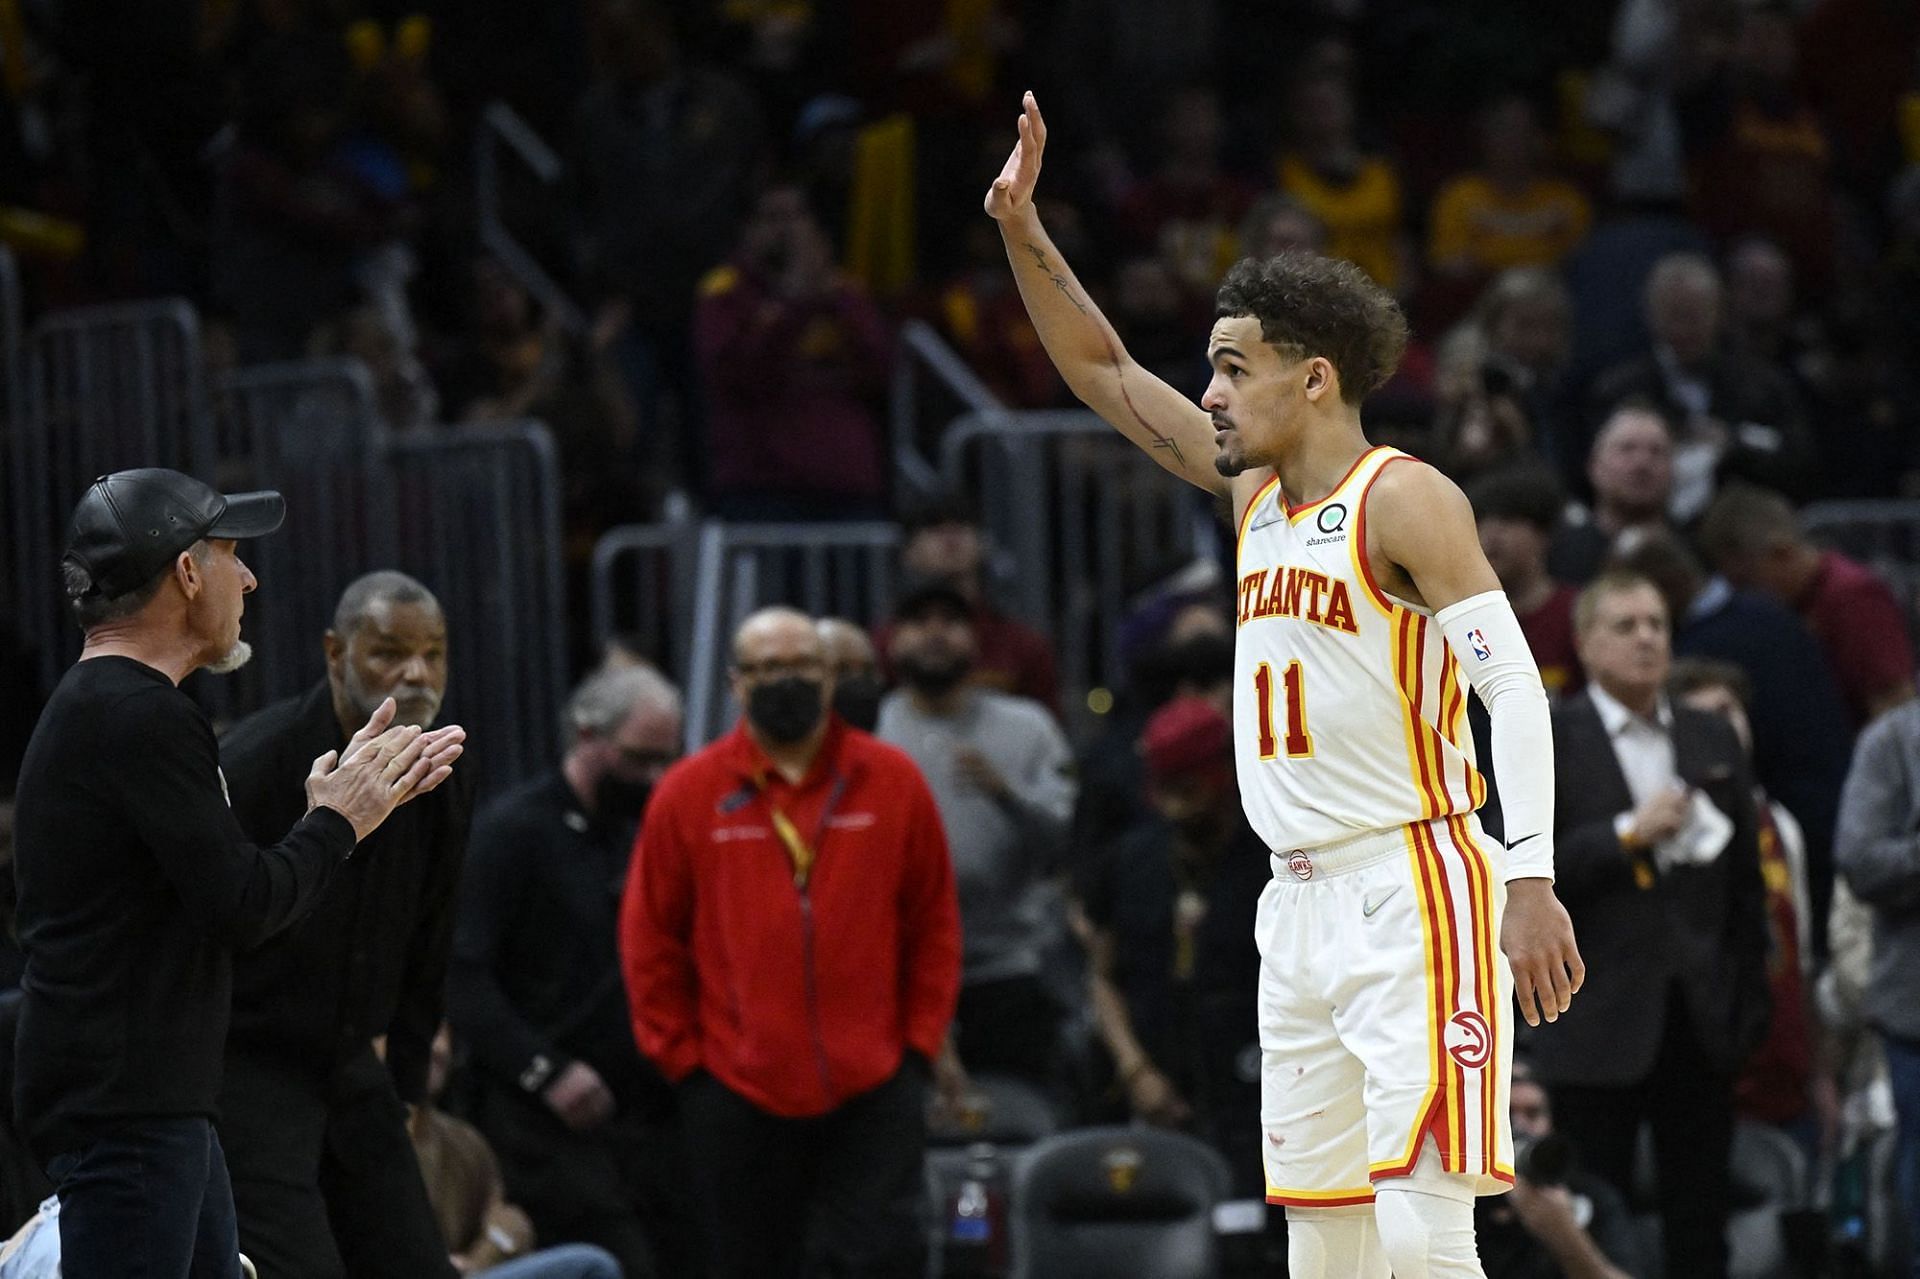 A year after dismissing the New York Knicks in the playoffs with a wave, Trae Young trolls Cleveland Cavaliers fans after his Atlanta Hawks eliminated the home team. [Photo: New York Post]